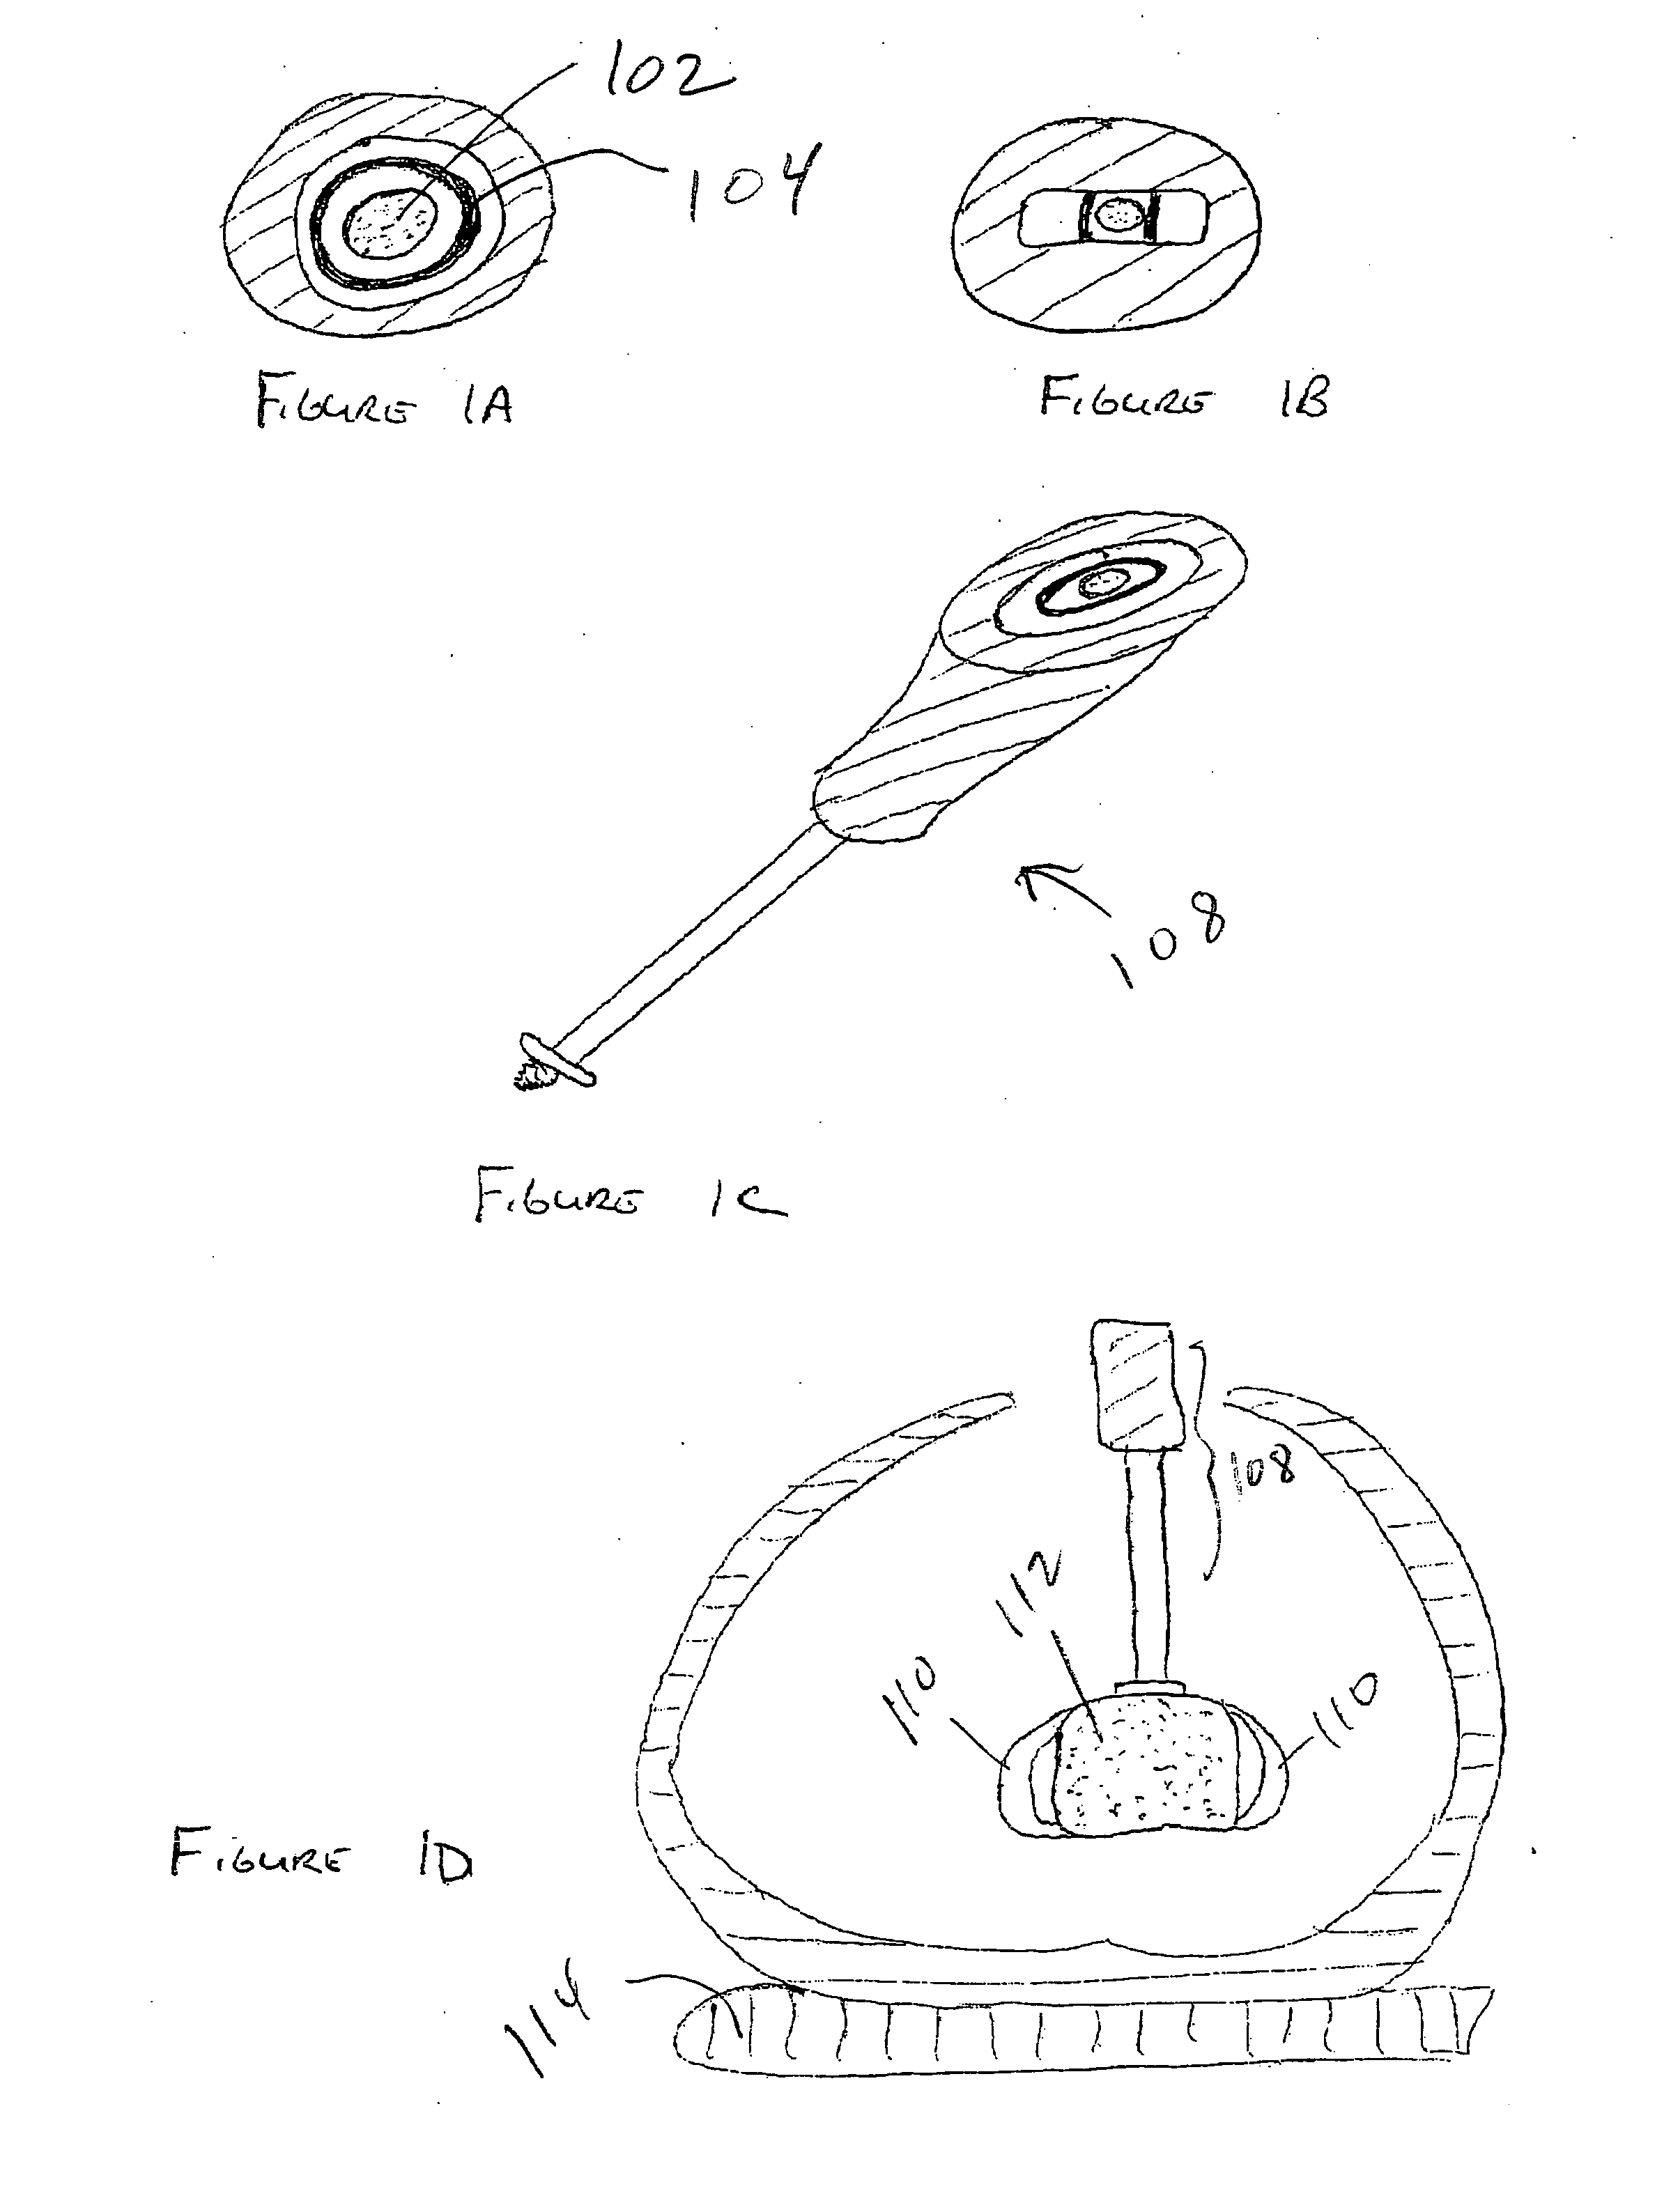 Methods and apparatus for artificial disc replacement (ADR) insertion and other surgical procedures